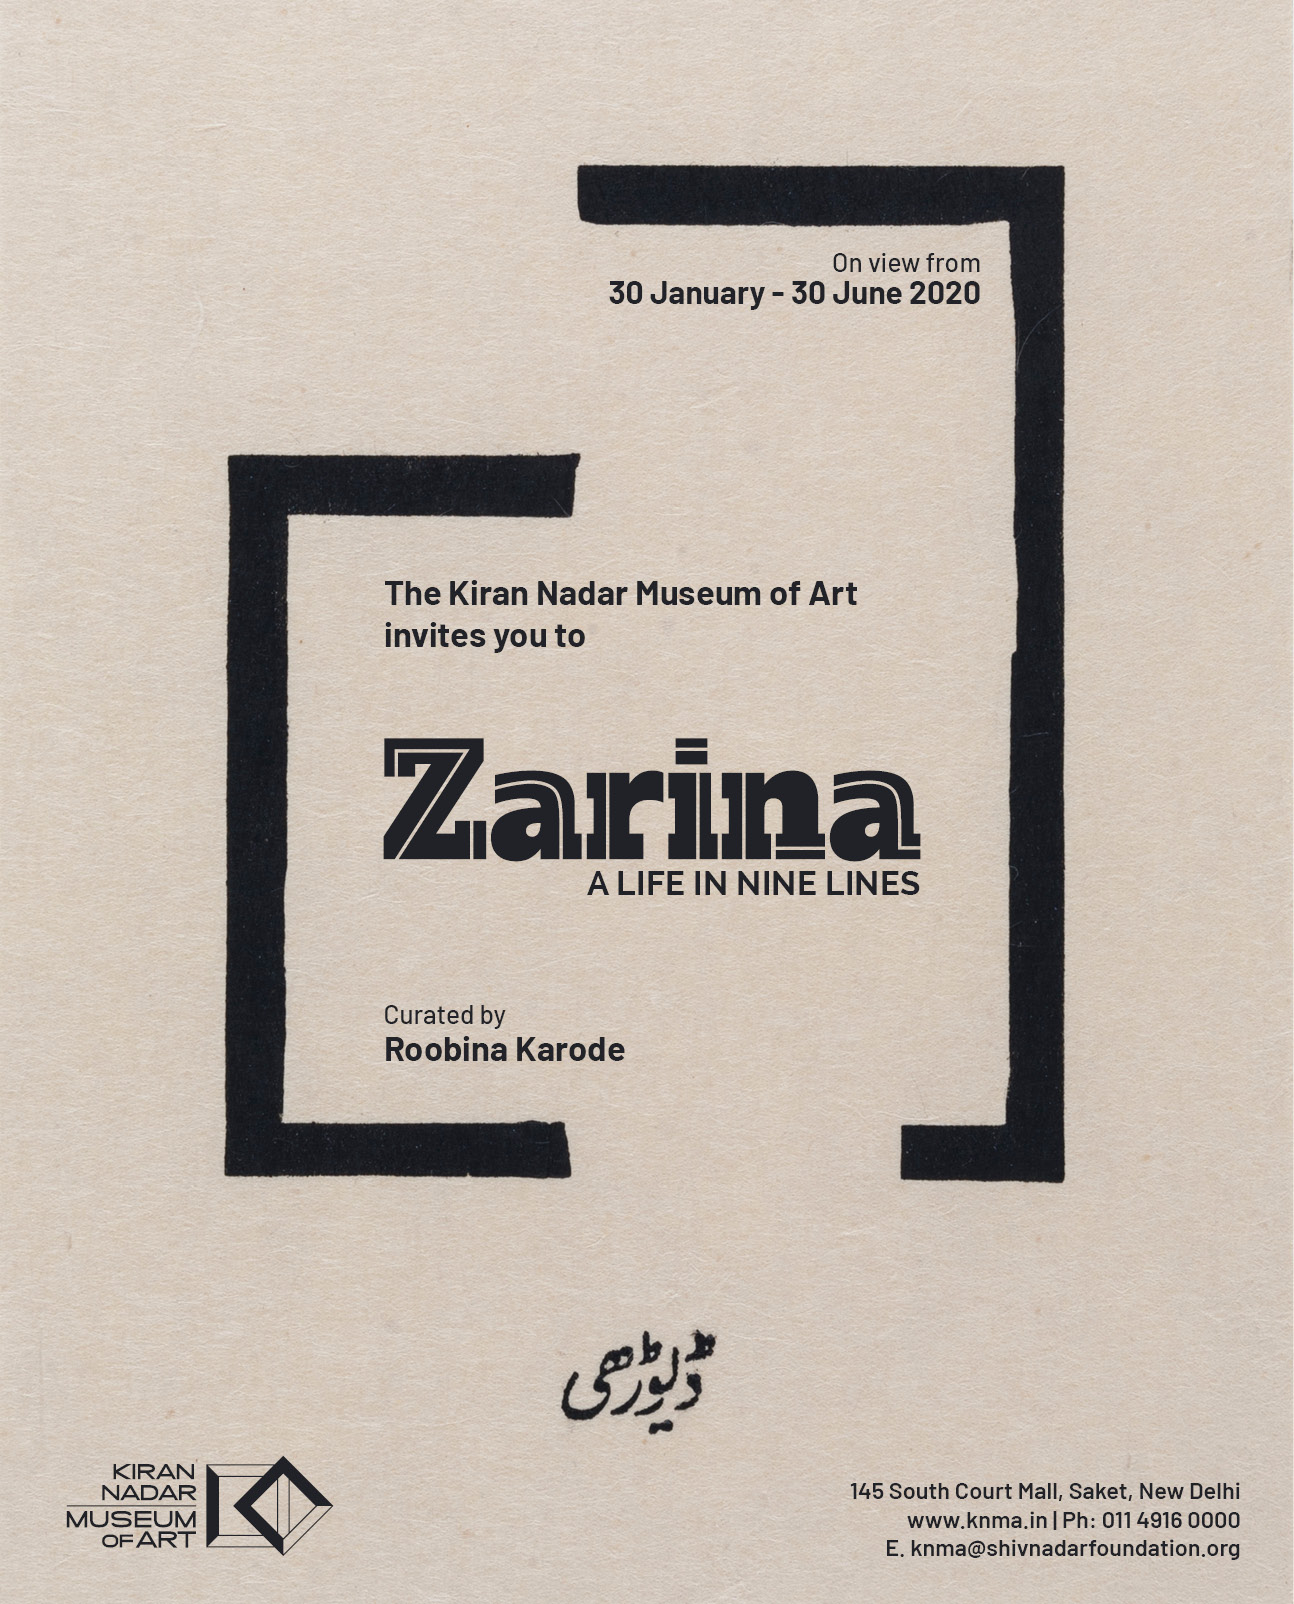 Zarina – A Life in Nine Lines